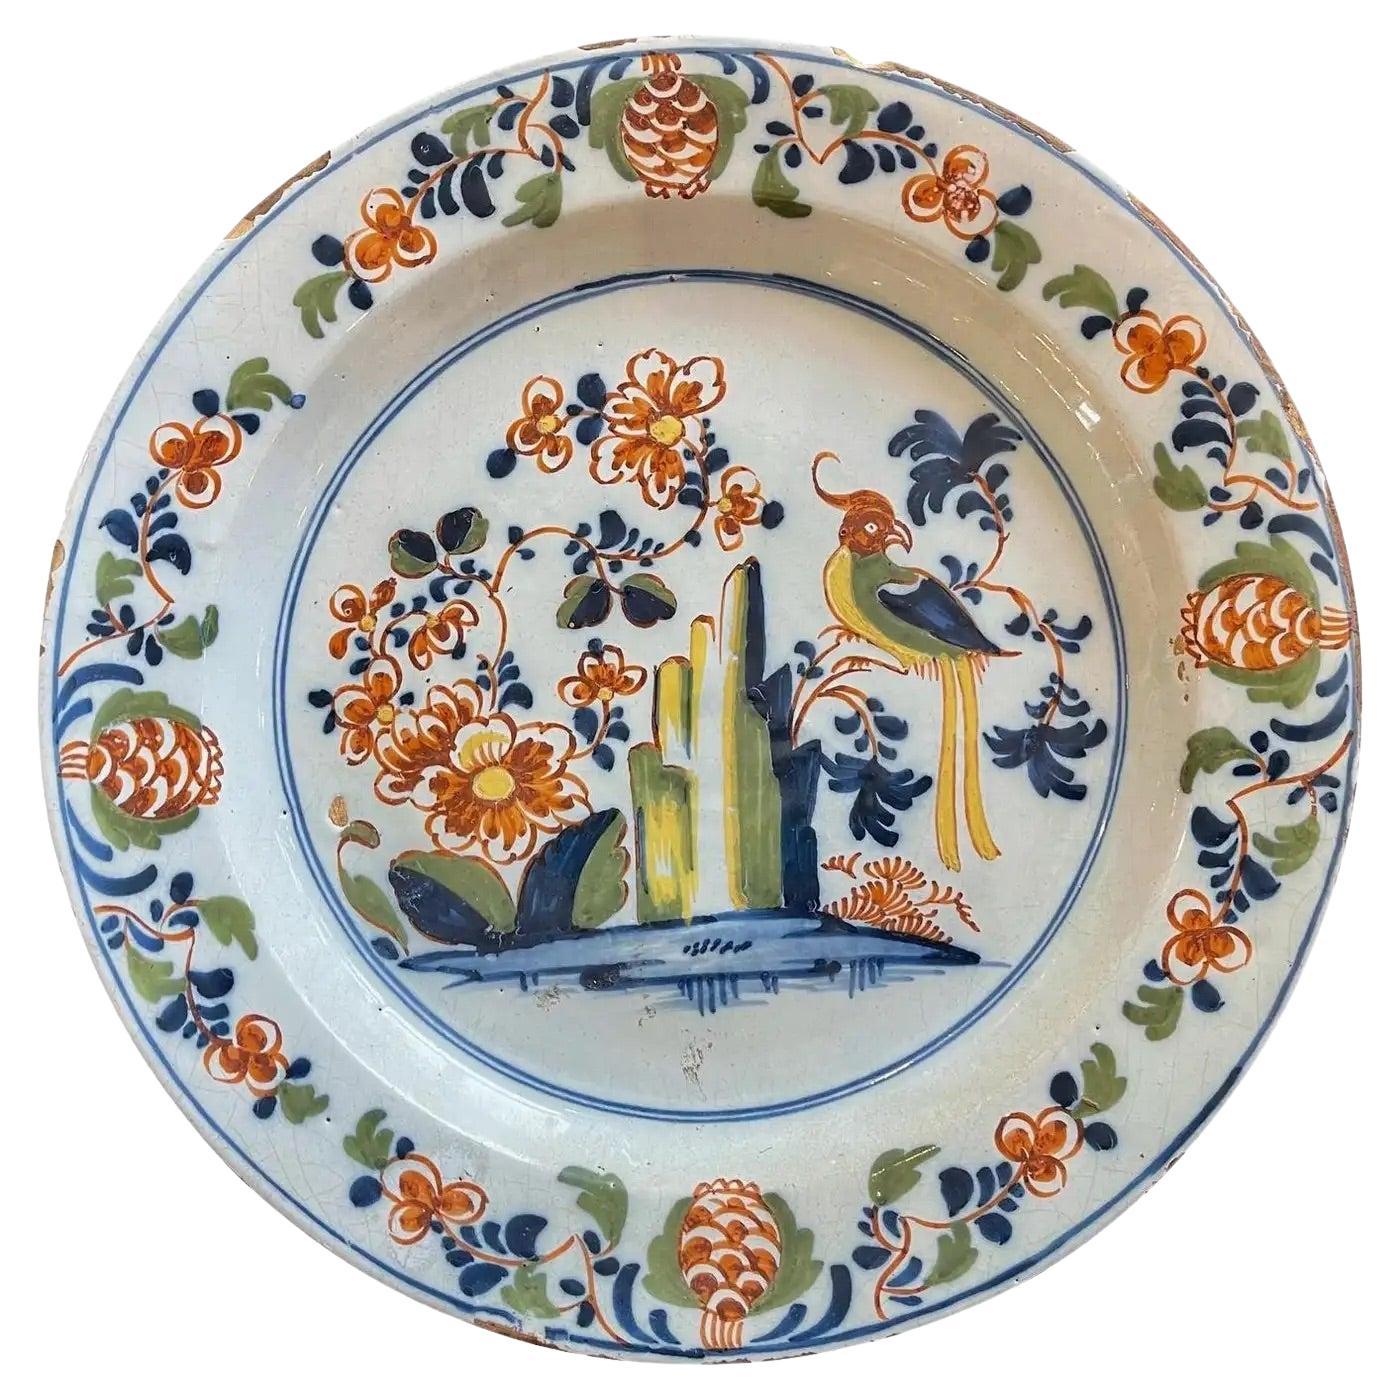 Englisch Delft Polychrome Delft Charger